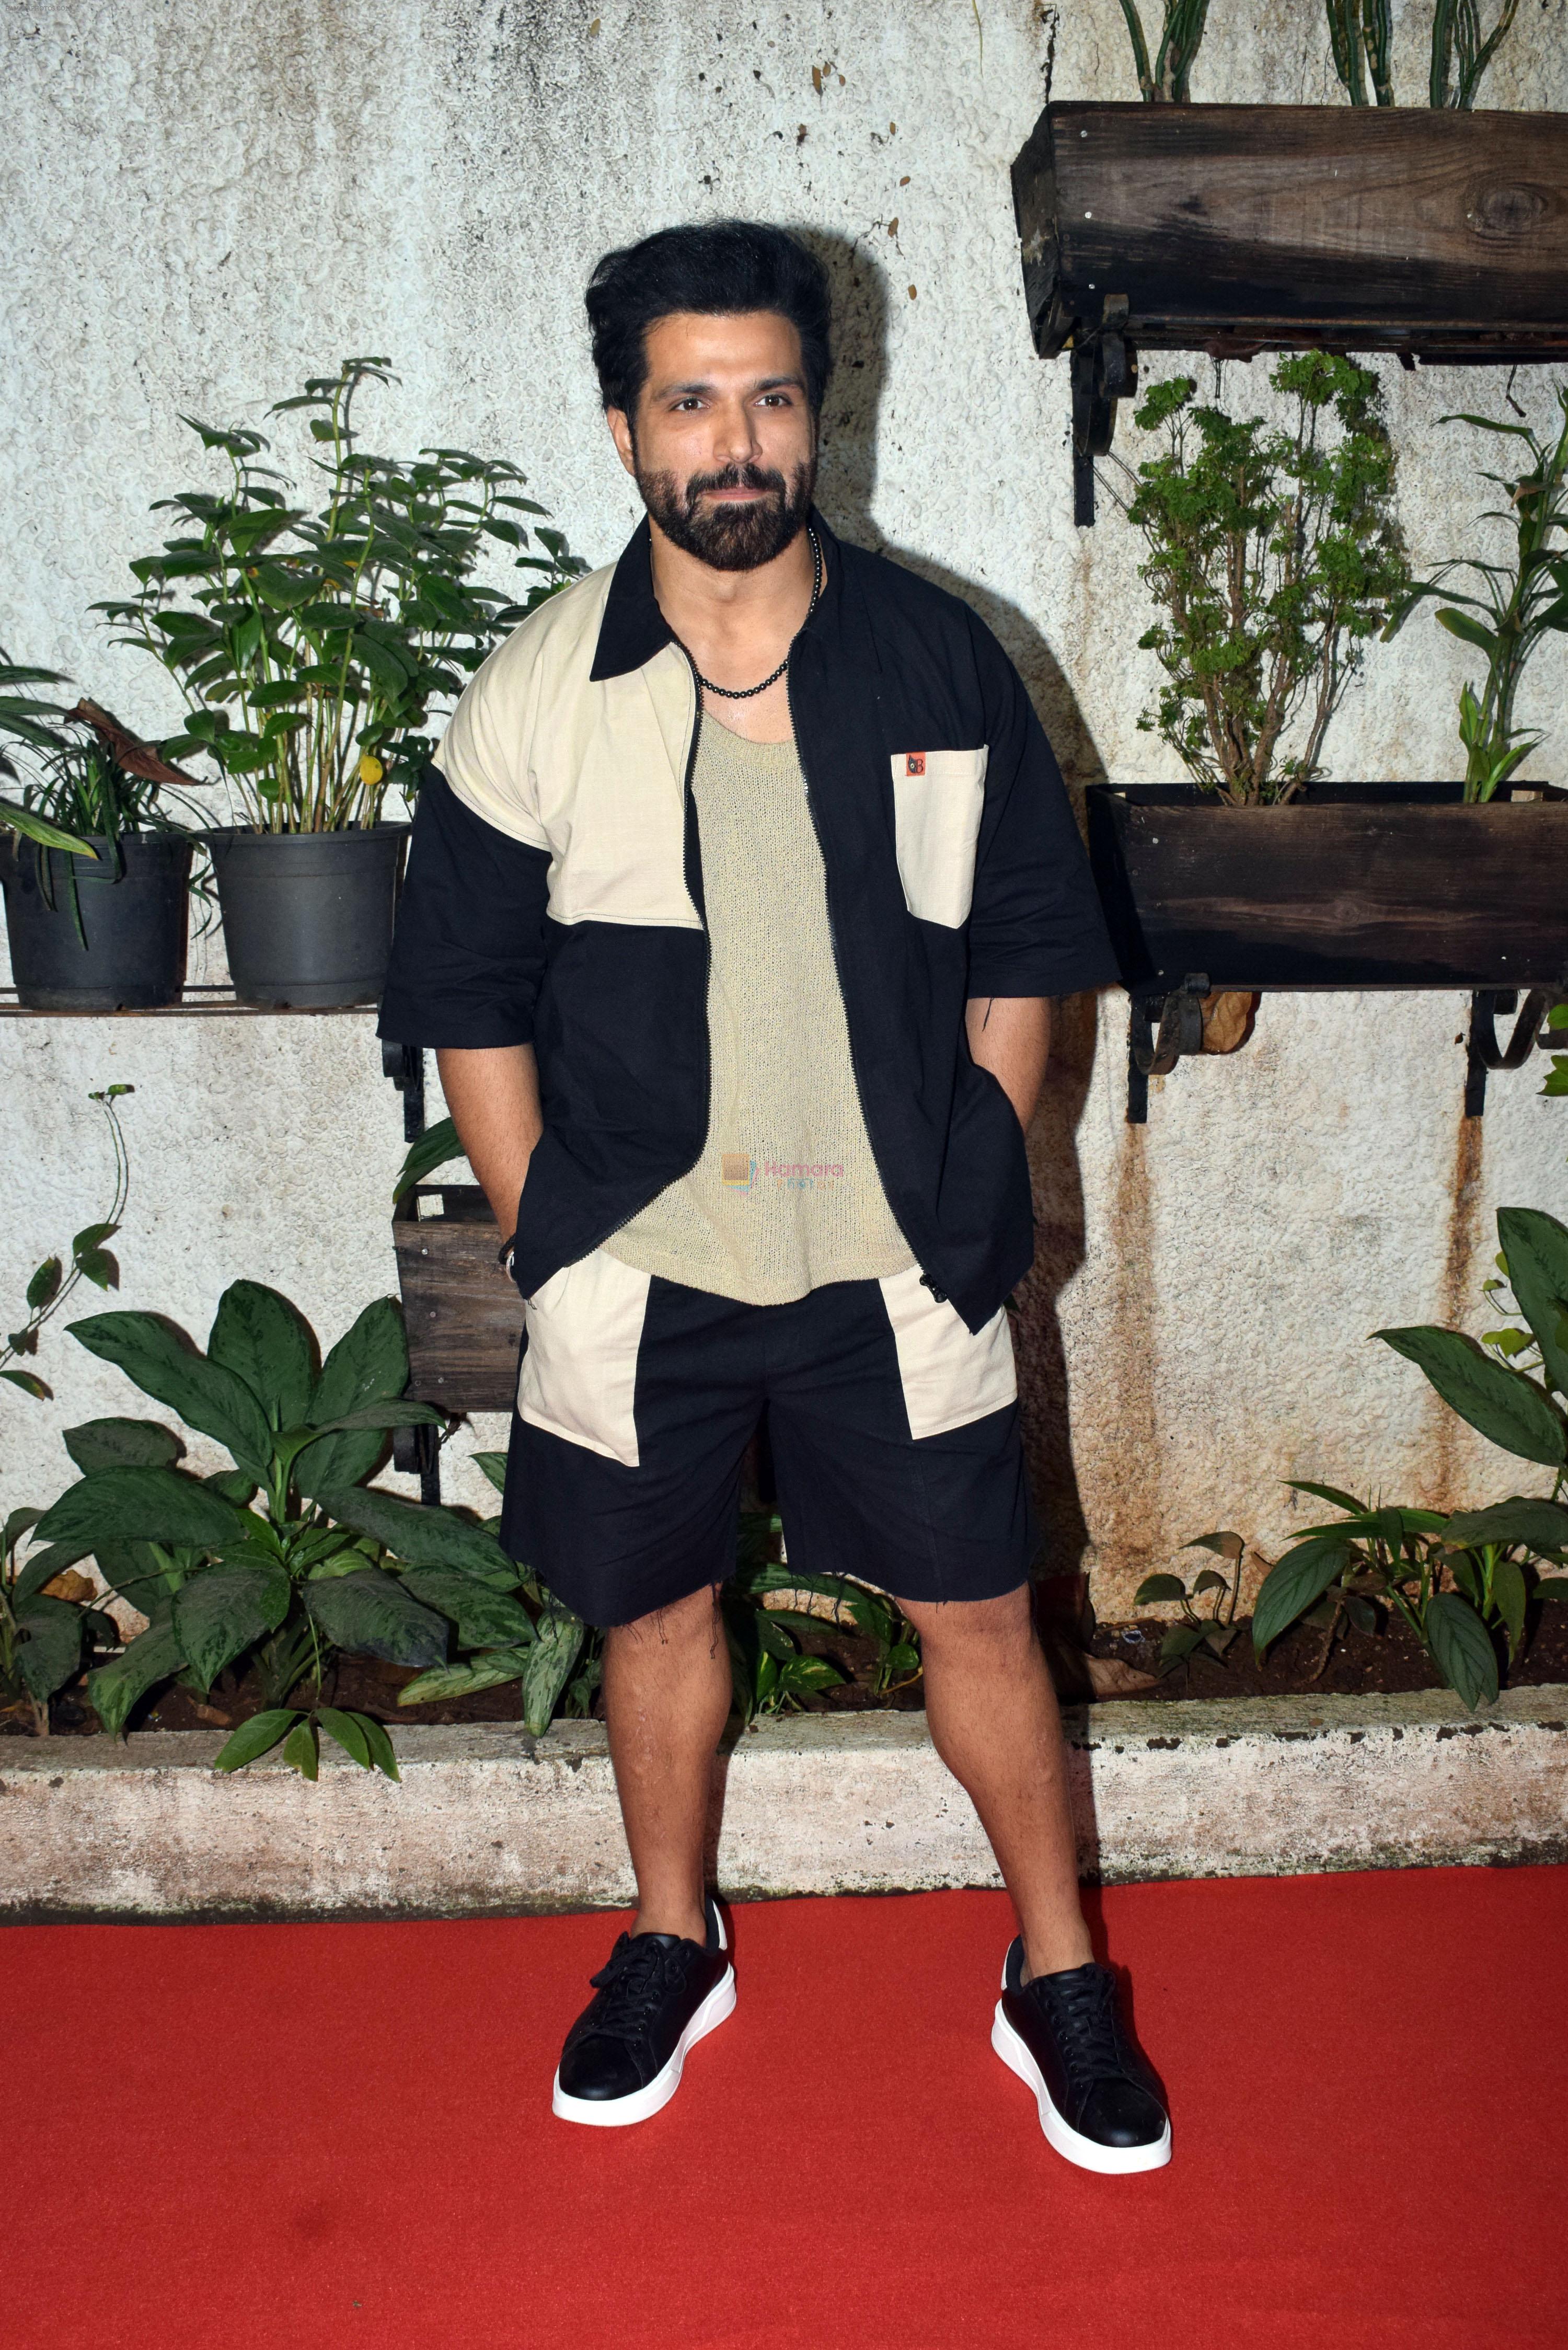 Rithvik Dhanjani at the premiere of Aakhri Sach series